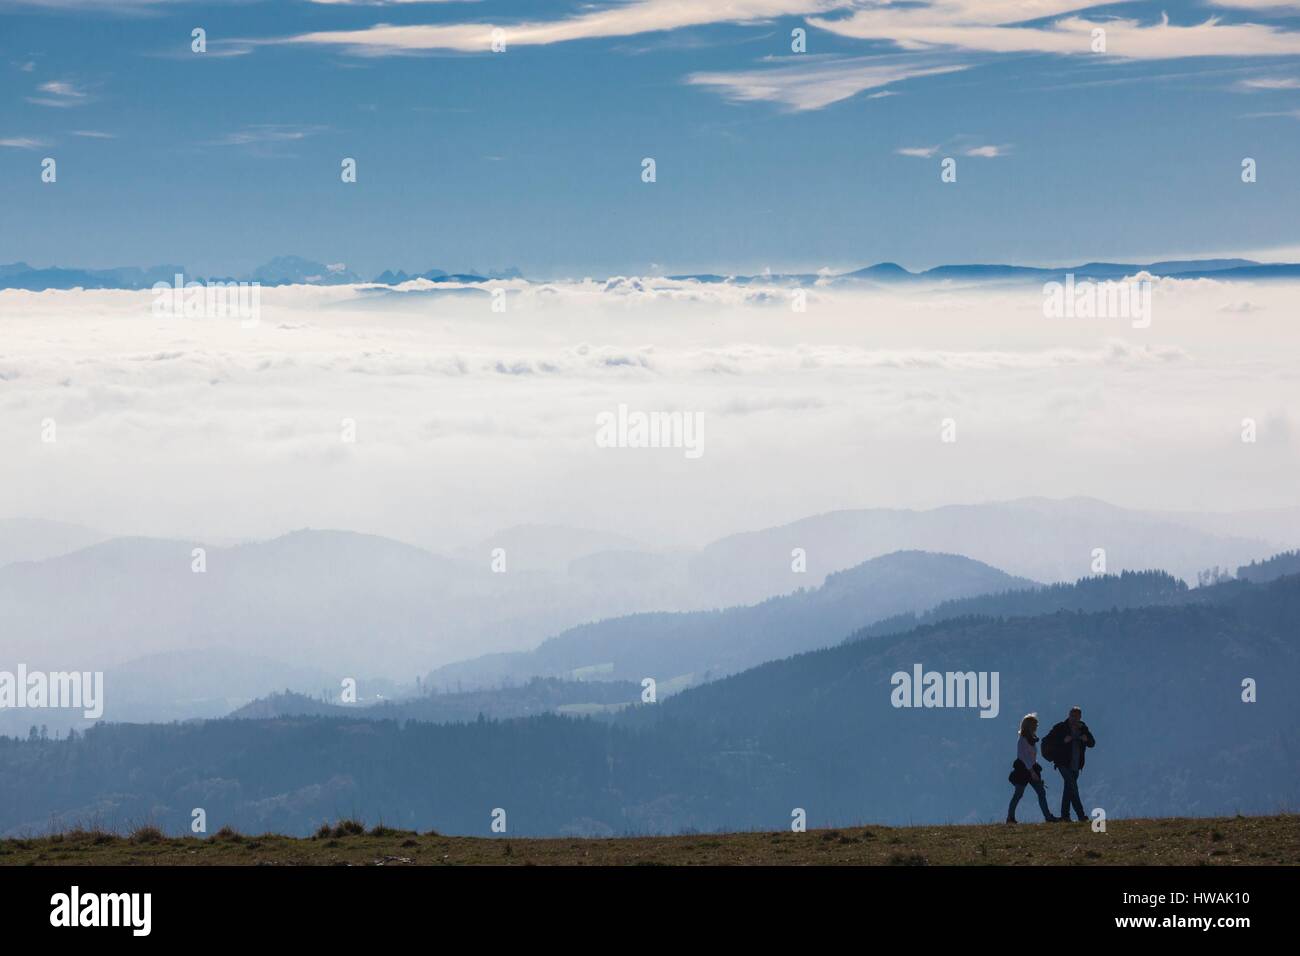 Germany, Baden-Wurttemburg, Black Forest, Belchen Mountain, summit view towards the Alps with people Stock Photo